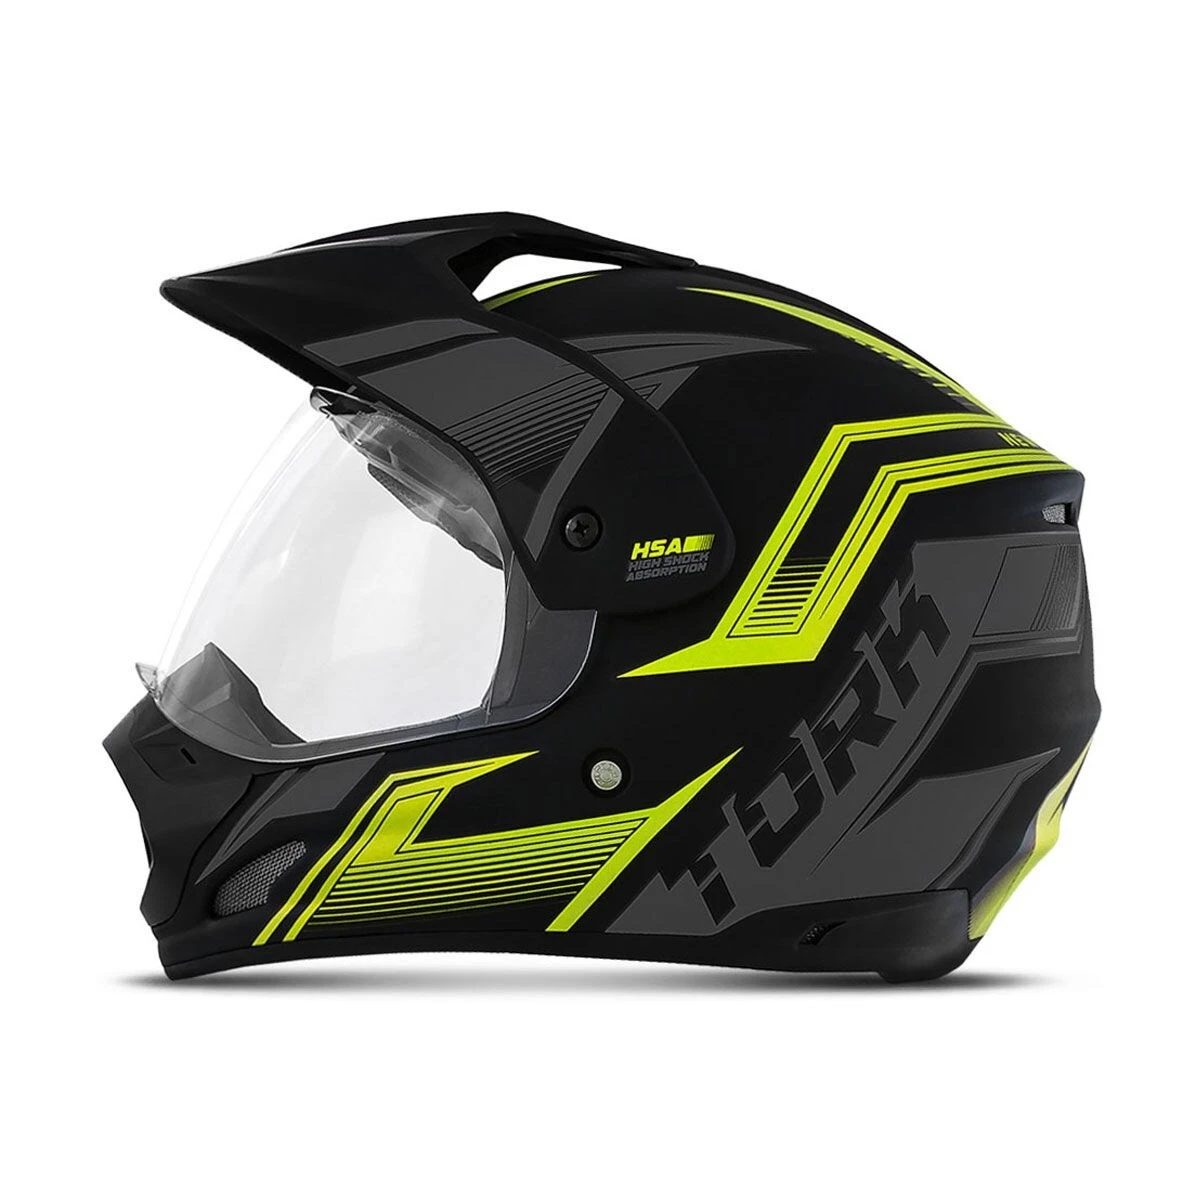 Capacete Off Road Pro Tork Th1 Vision New Adventure